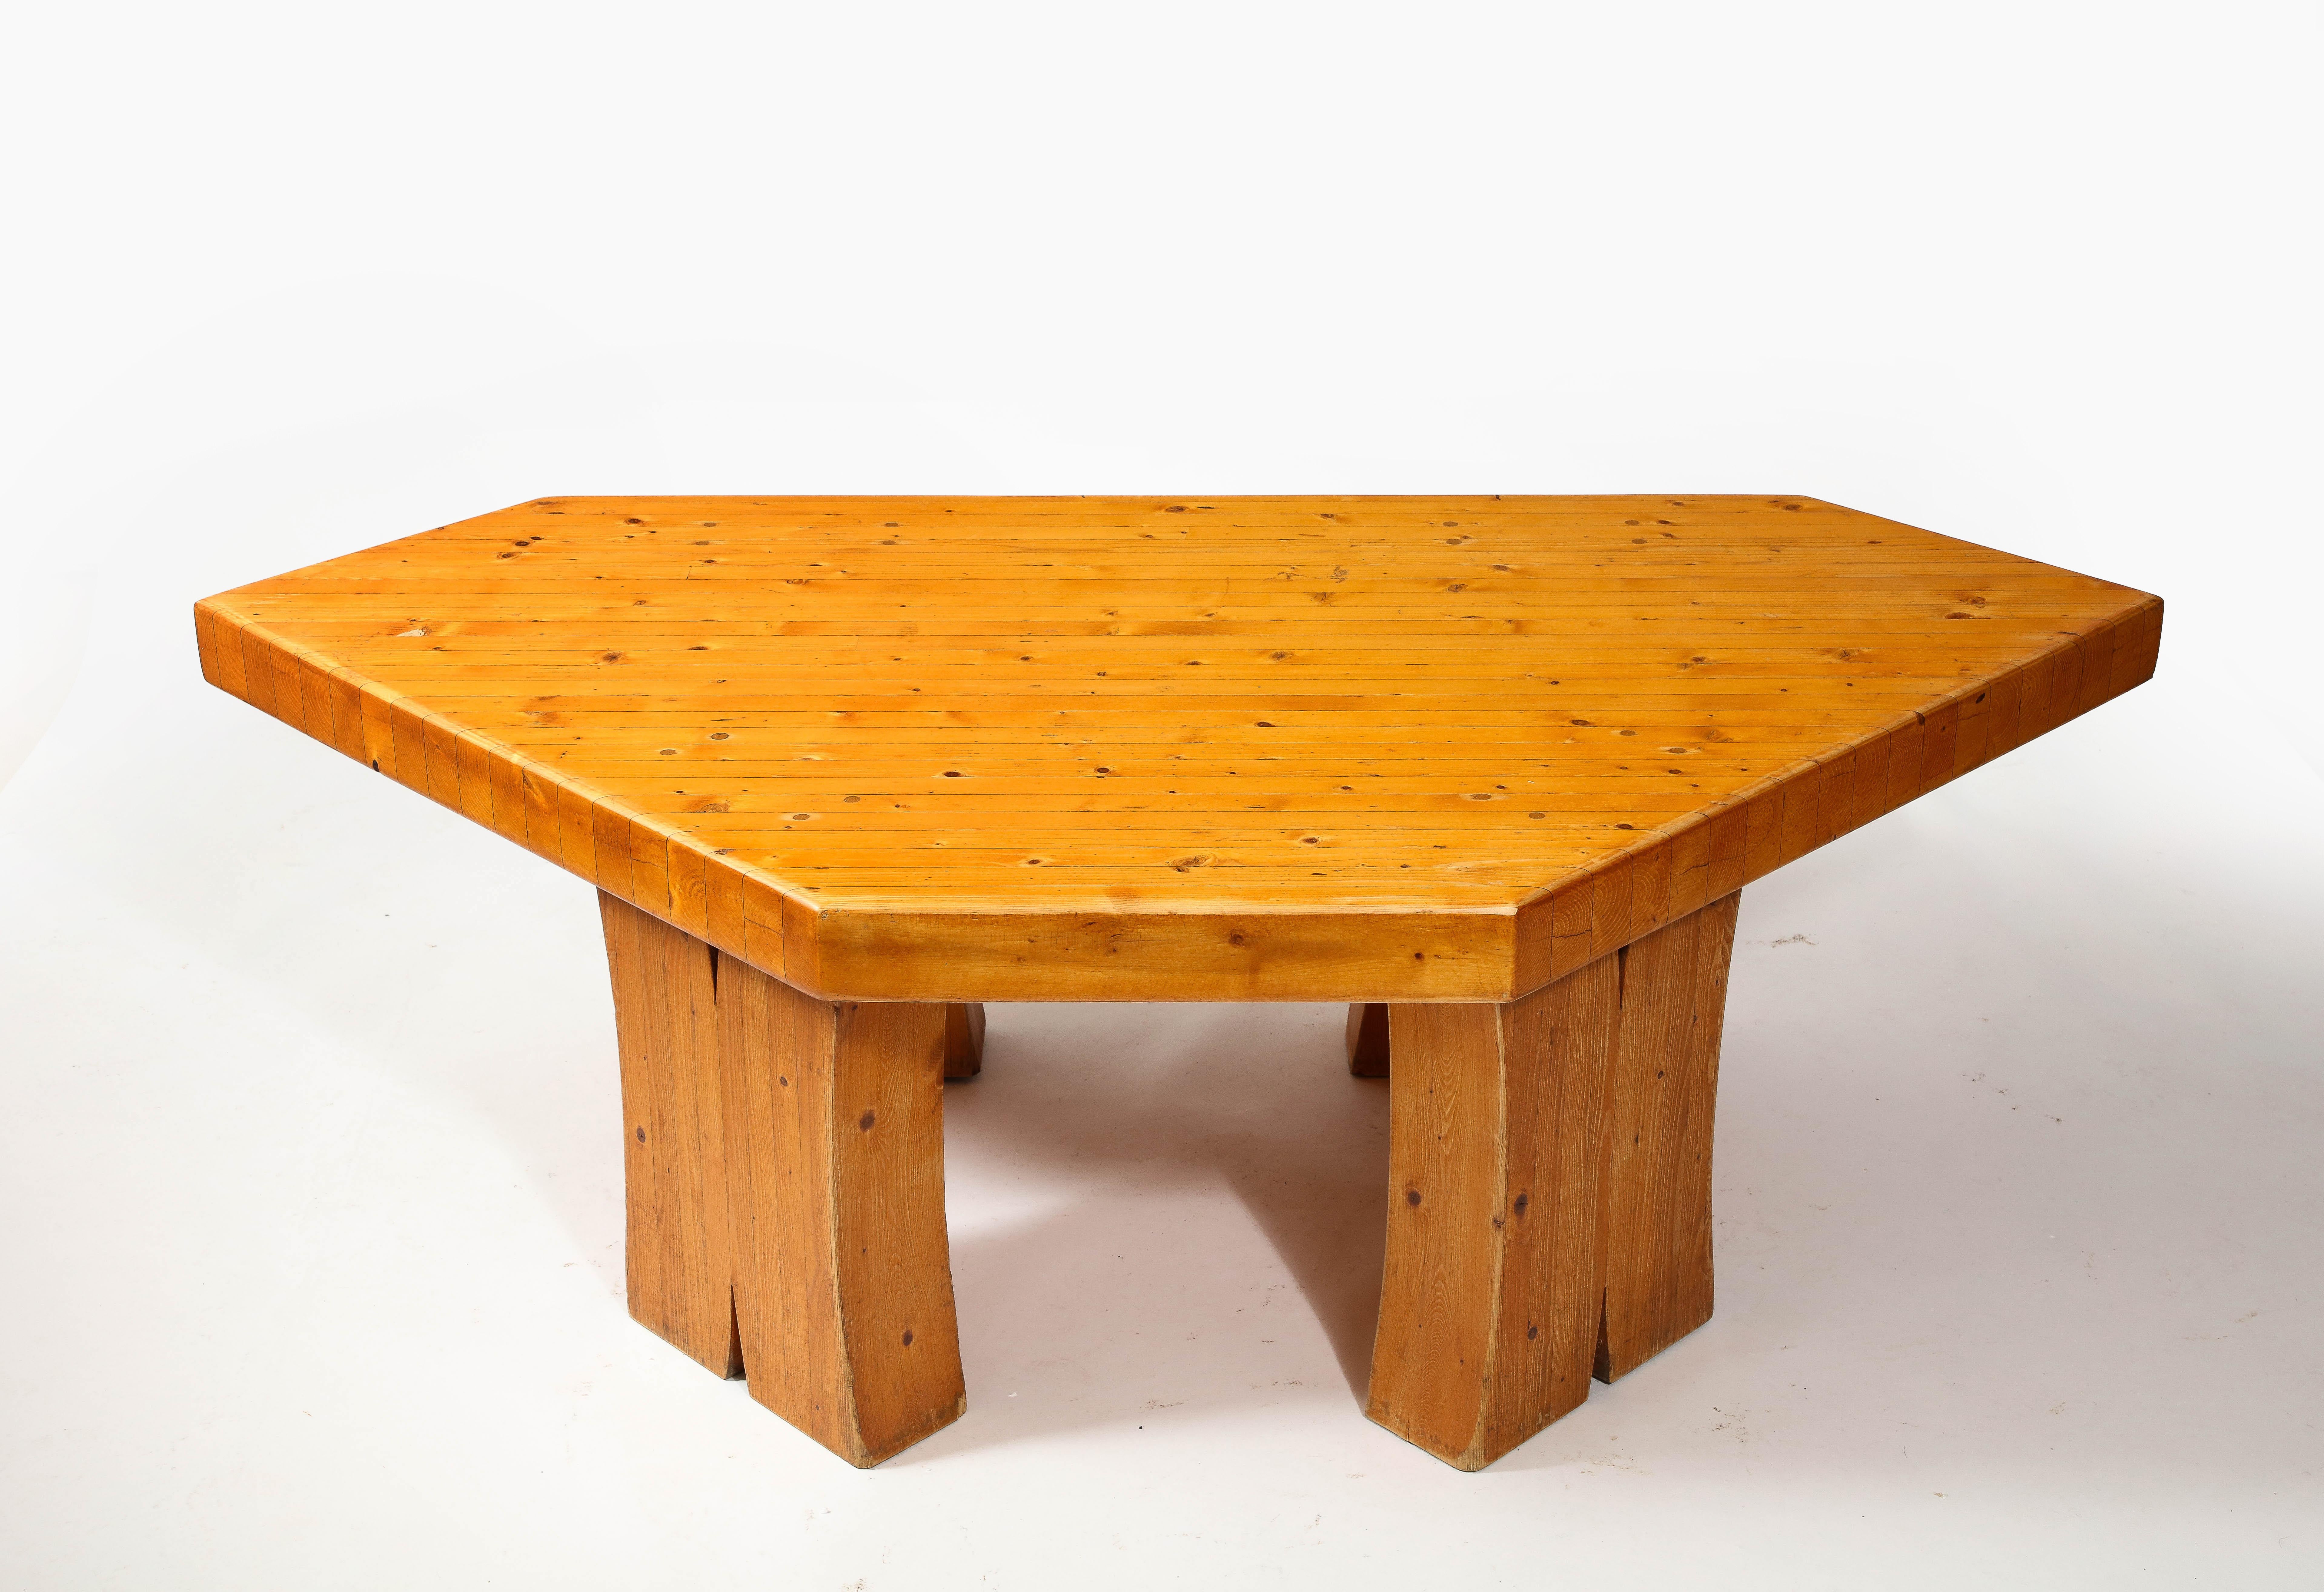 20th Century Large Solid Pine Irregularly Shaped Brutalist Coffee Table, France 1960's